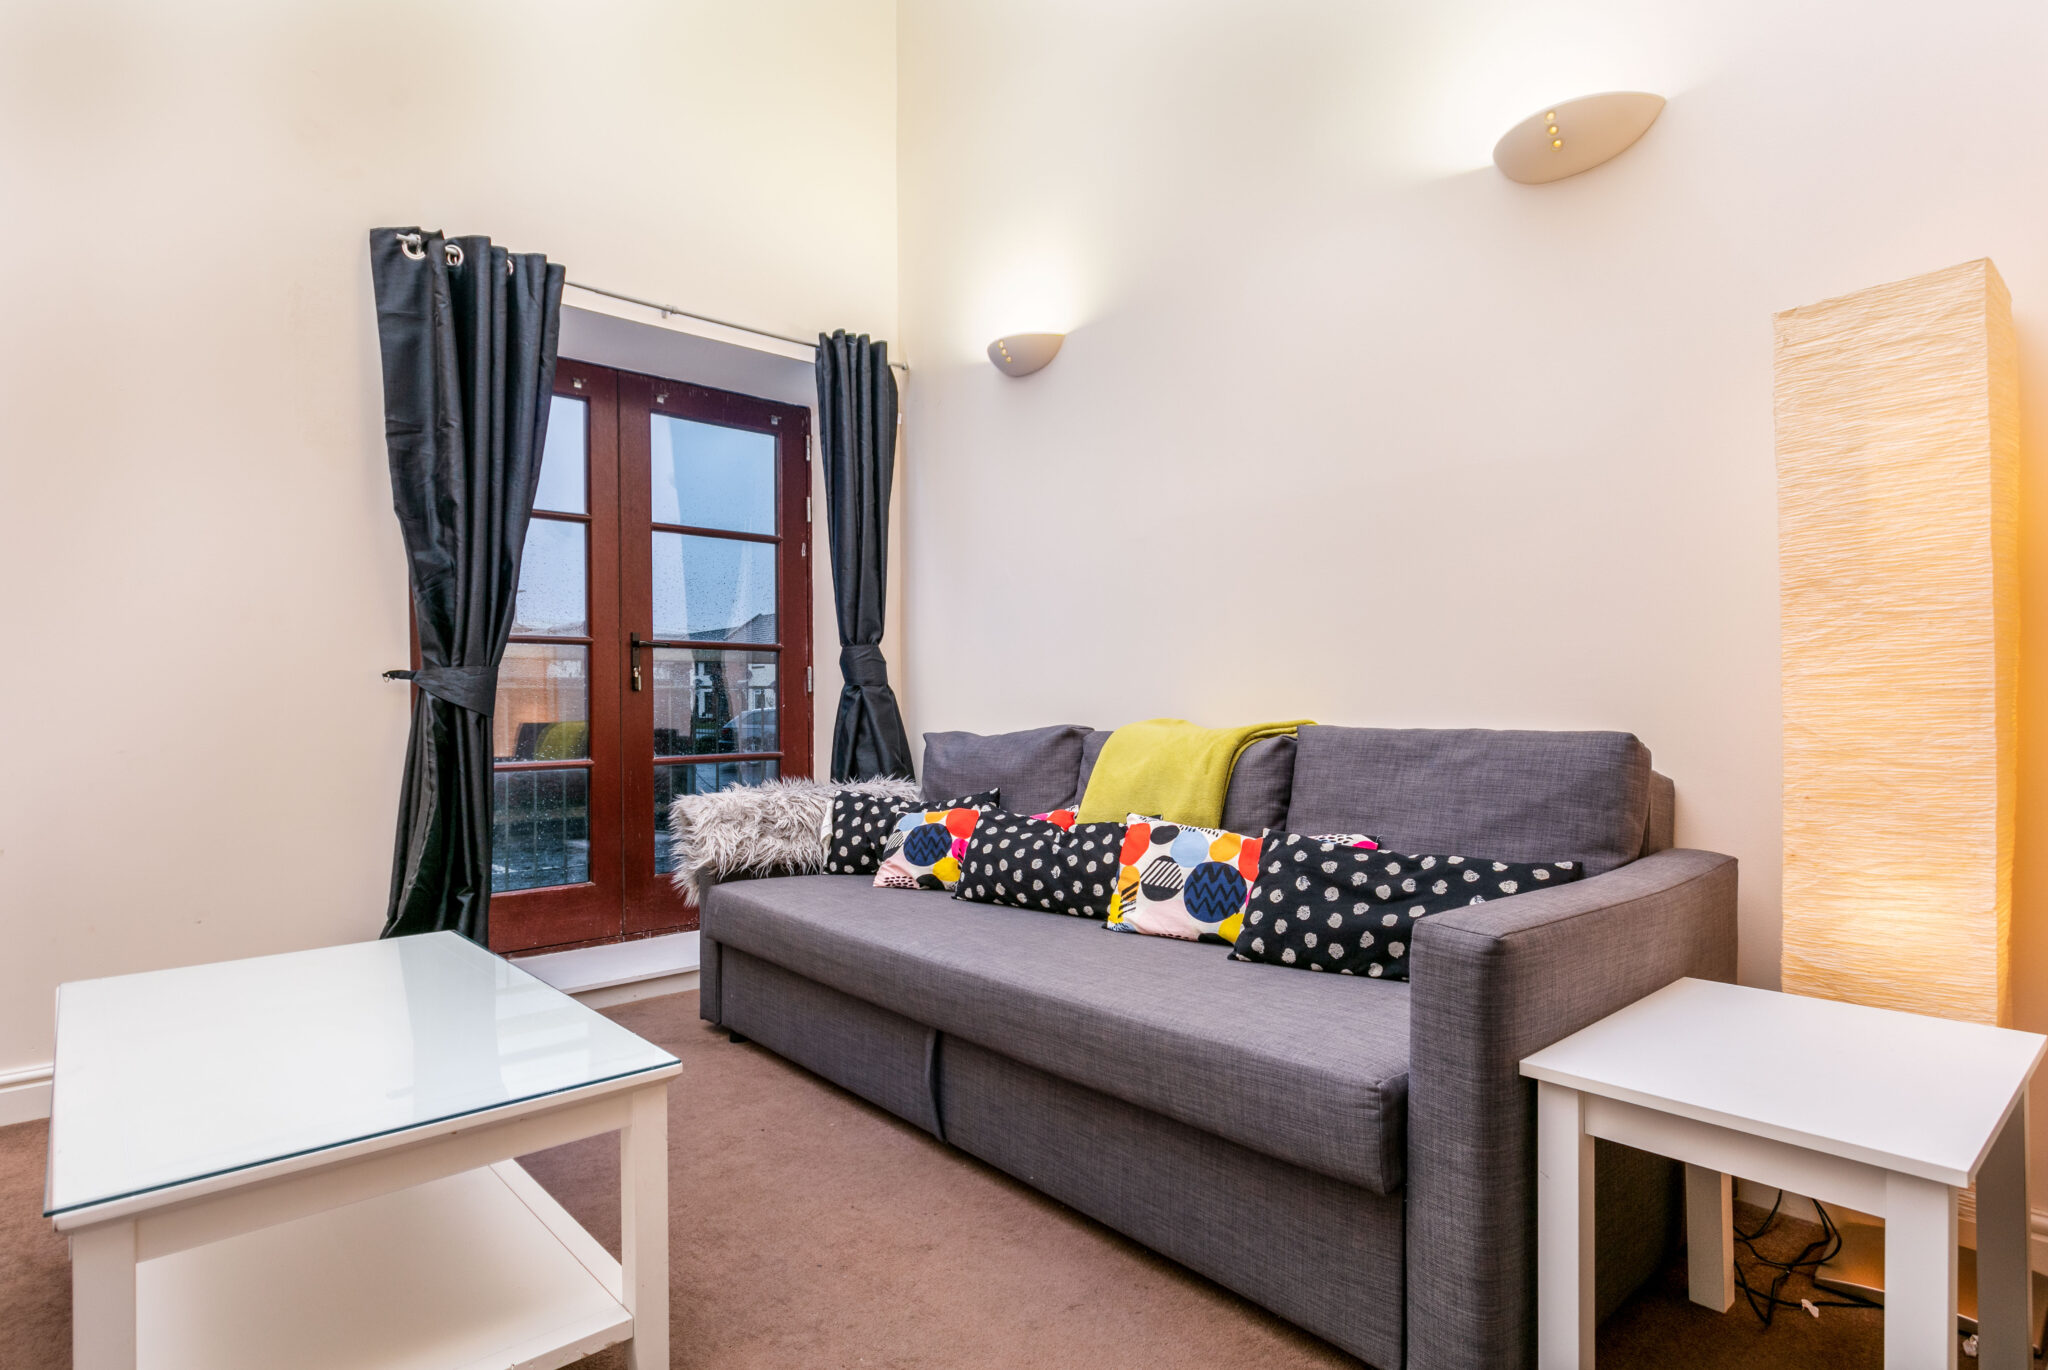 Book Serviced Accommodation in Ayr Near The Beach, Prestwick Golf Club, Ayr Racecourse and Gatwick Prestwick Airport! Cheaper Than Hotels! Urban Stay